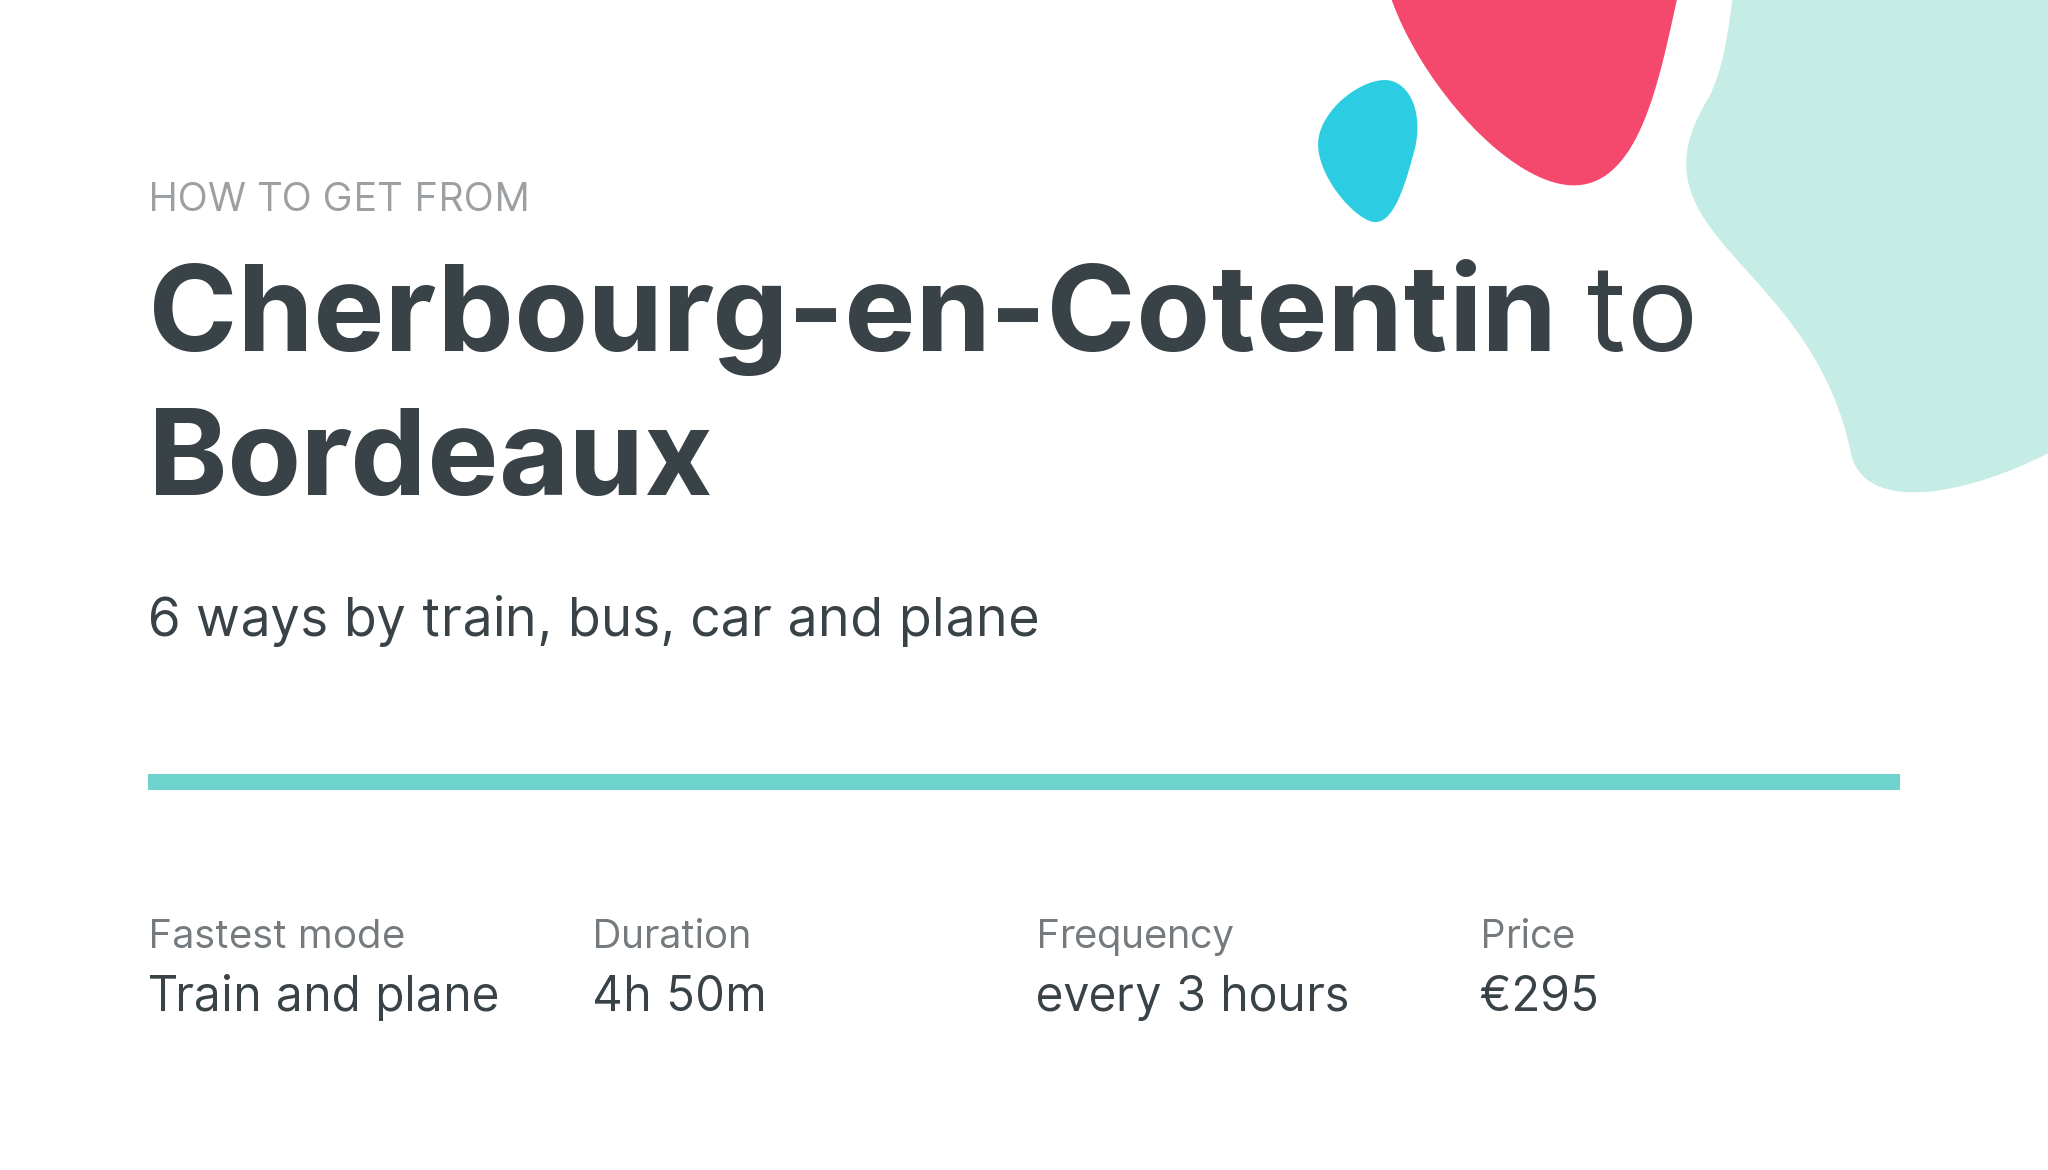 How do I get from Cherbourg-en-Cotentin to Bordeaux